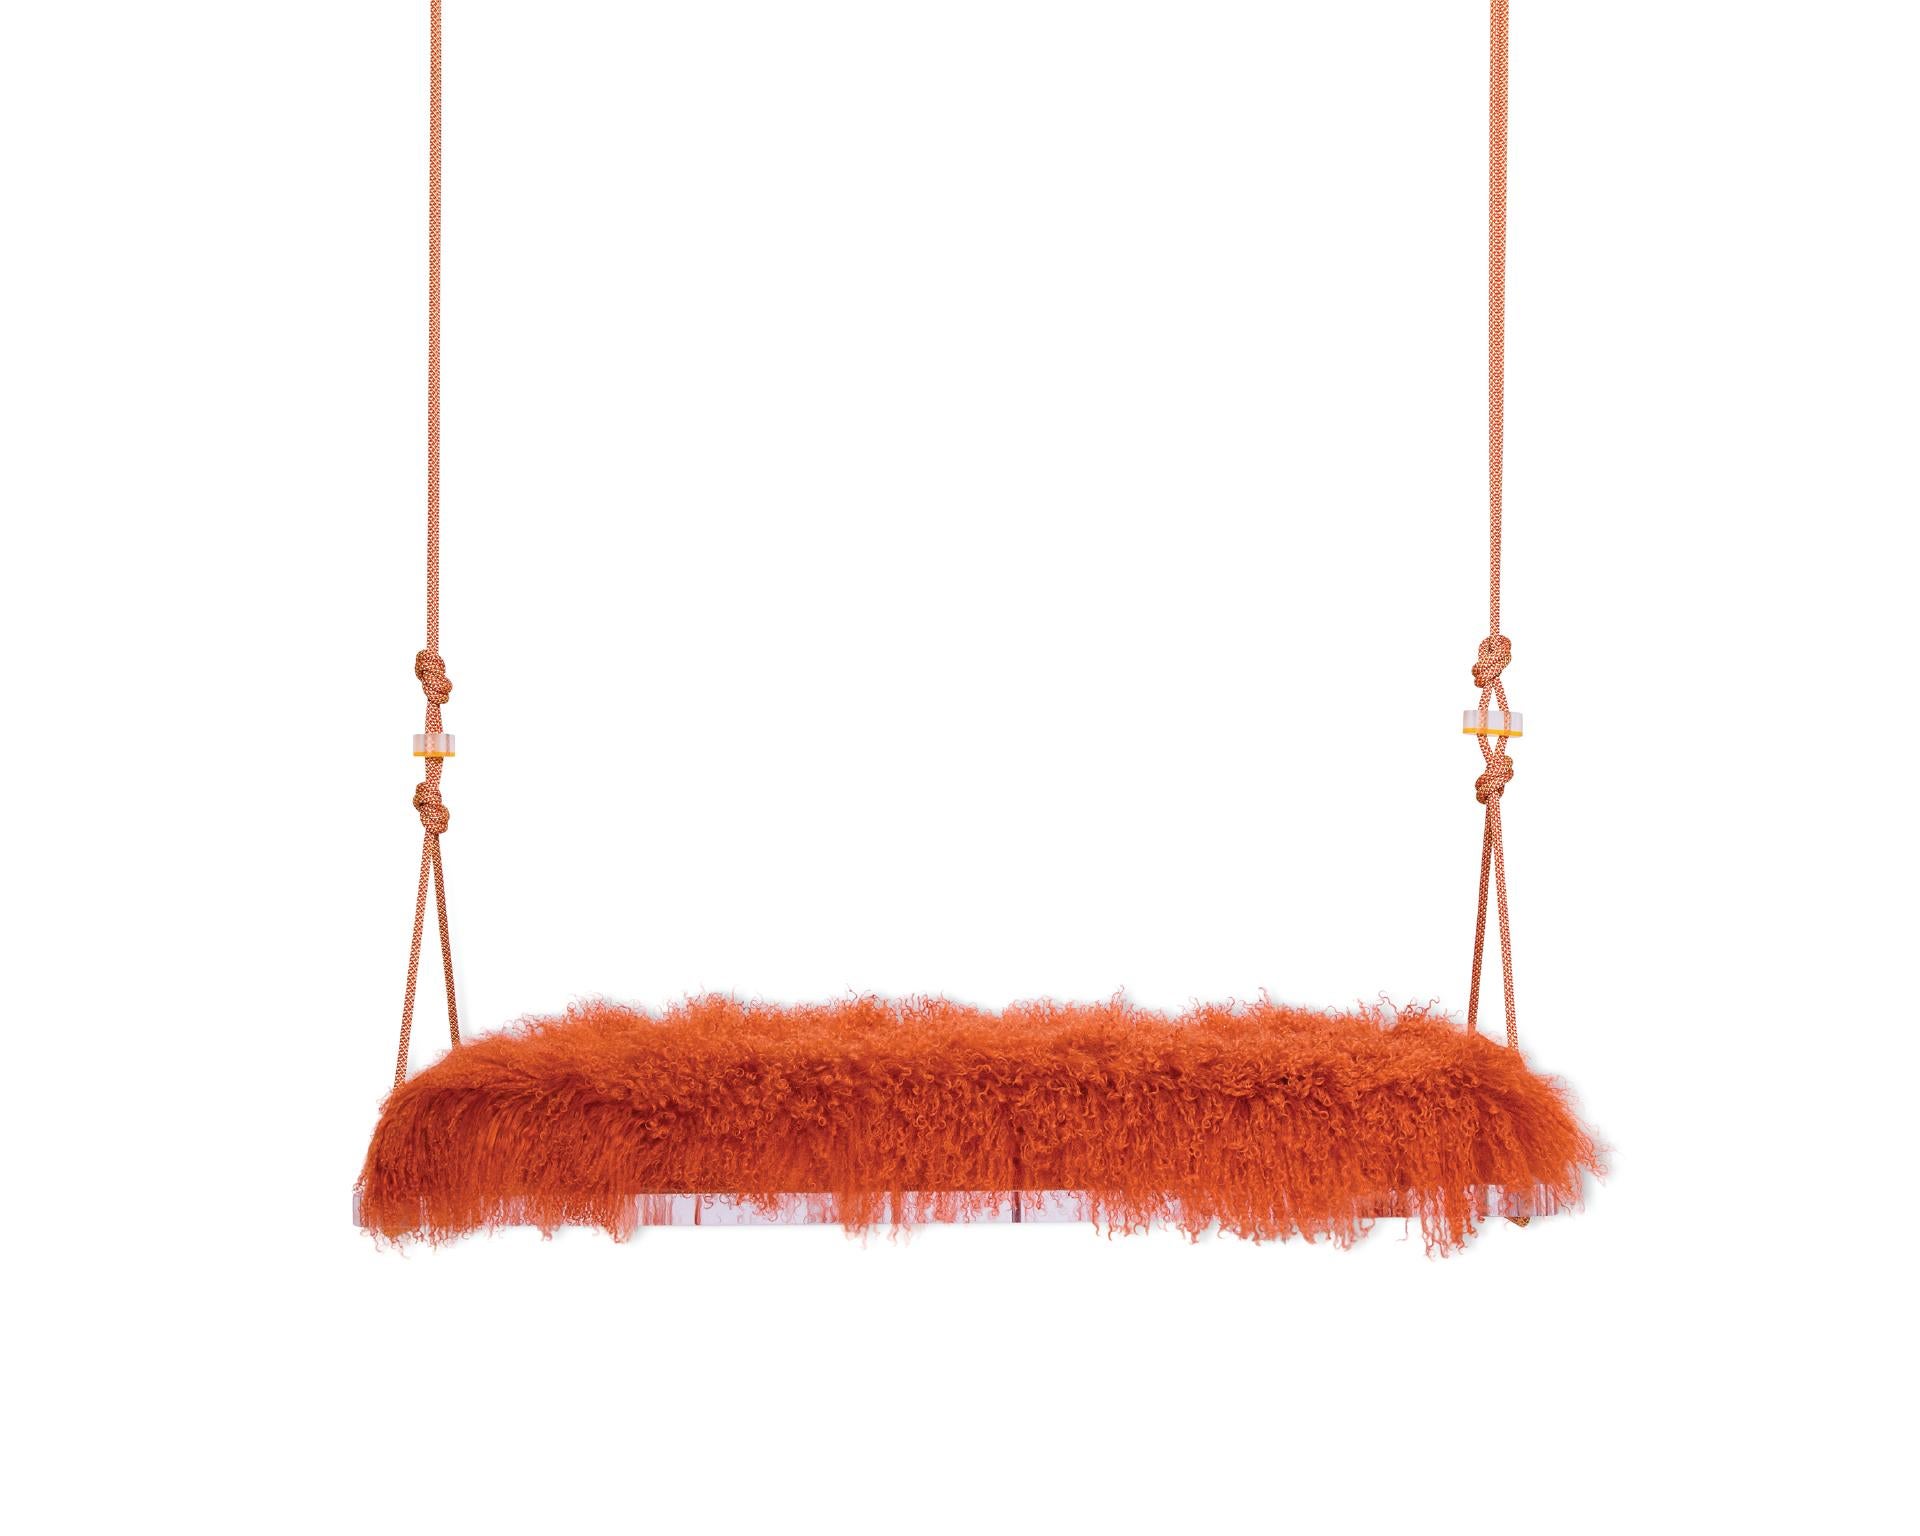 The Pick-Me-Up swinging bench is a playful indoor swing for two featuring a Tibetan Lamb cushion, colorful accessory cord, a Lucite base and Lucite accessories. Featured here is a 1970s inspired Orange, however, there are a variety of Tibetan Lamb